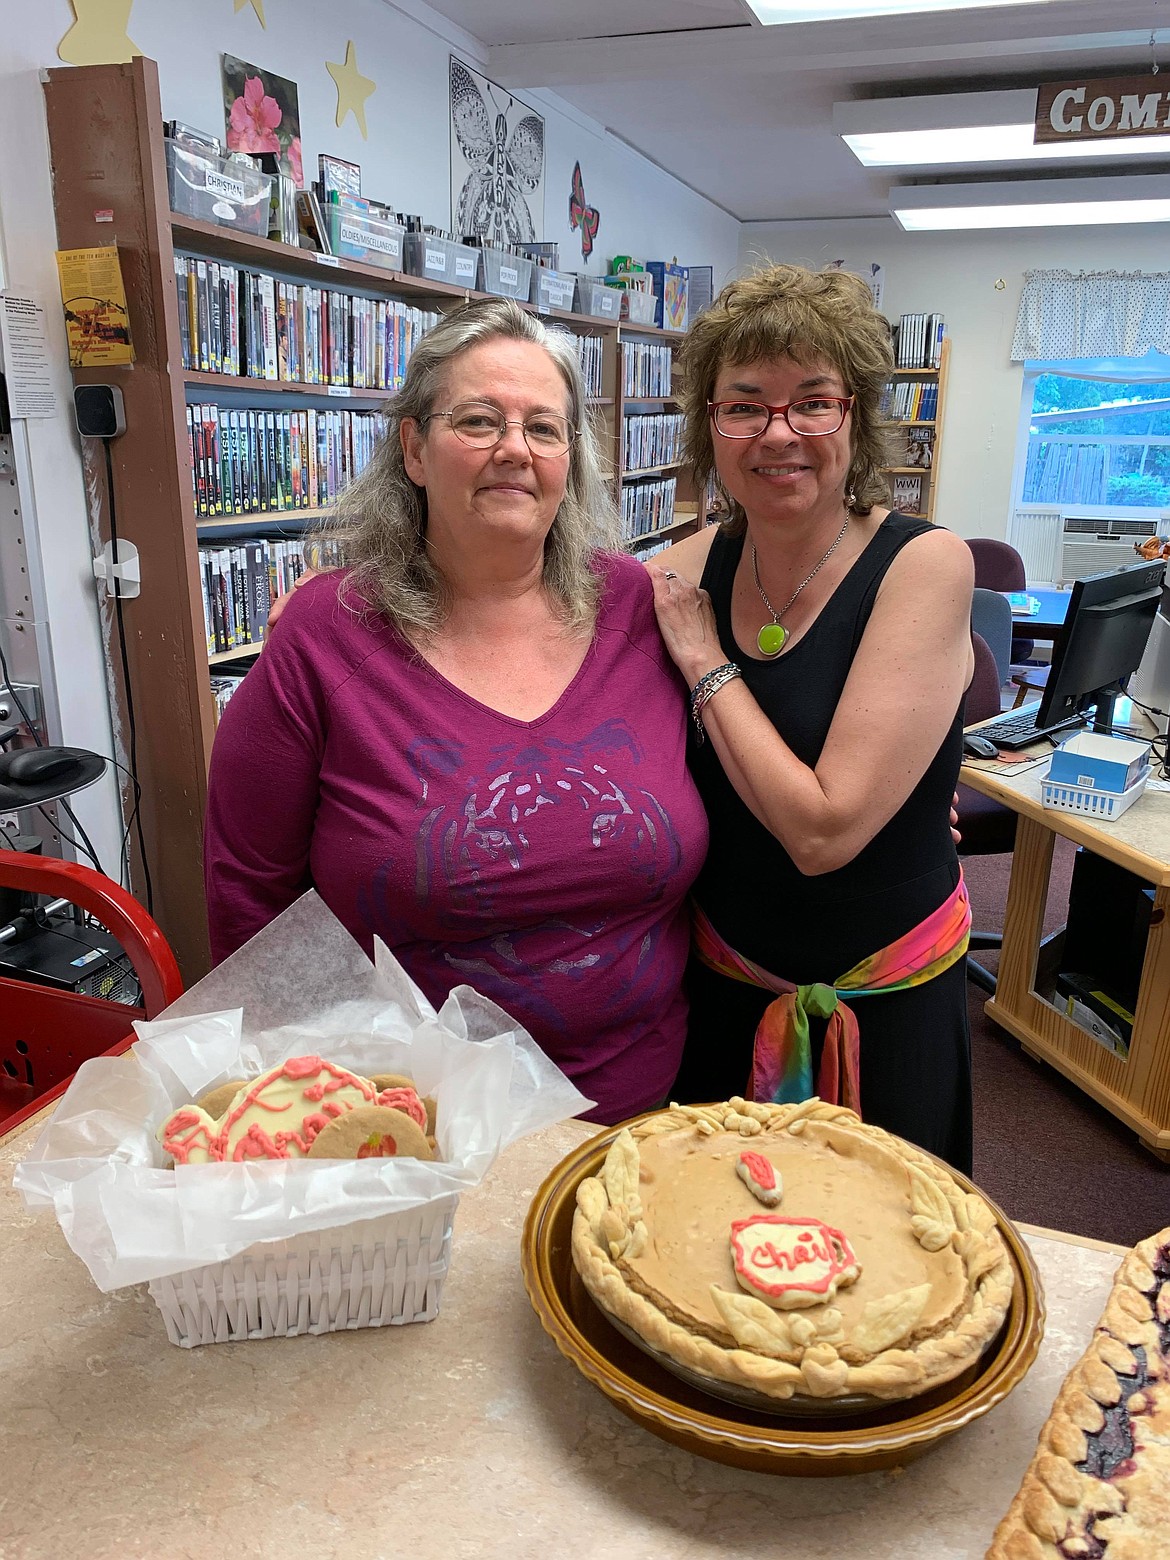 Debbie Kelsey and Leslie Budwitz pose with a cheesecake at the Summer Reading Program Finale. (Photo courtesy of Florence Evans)